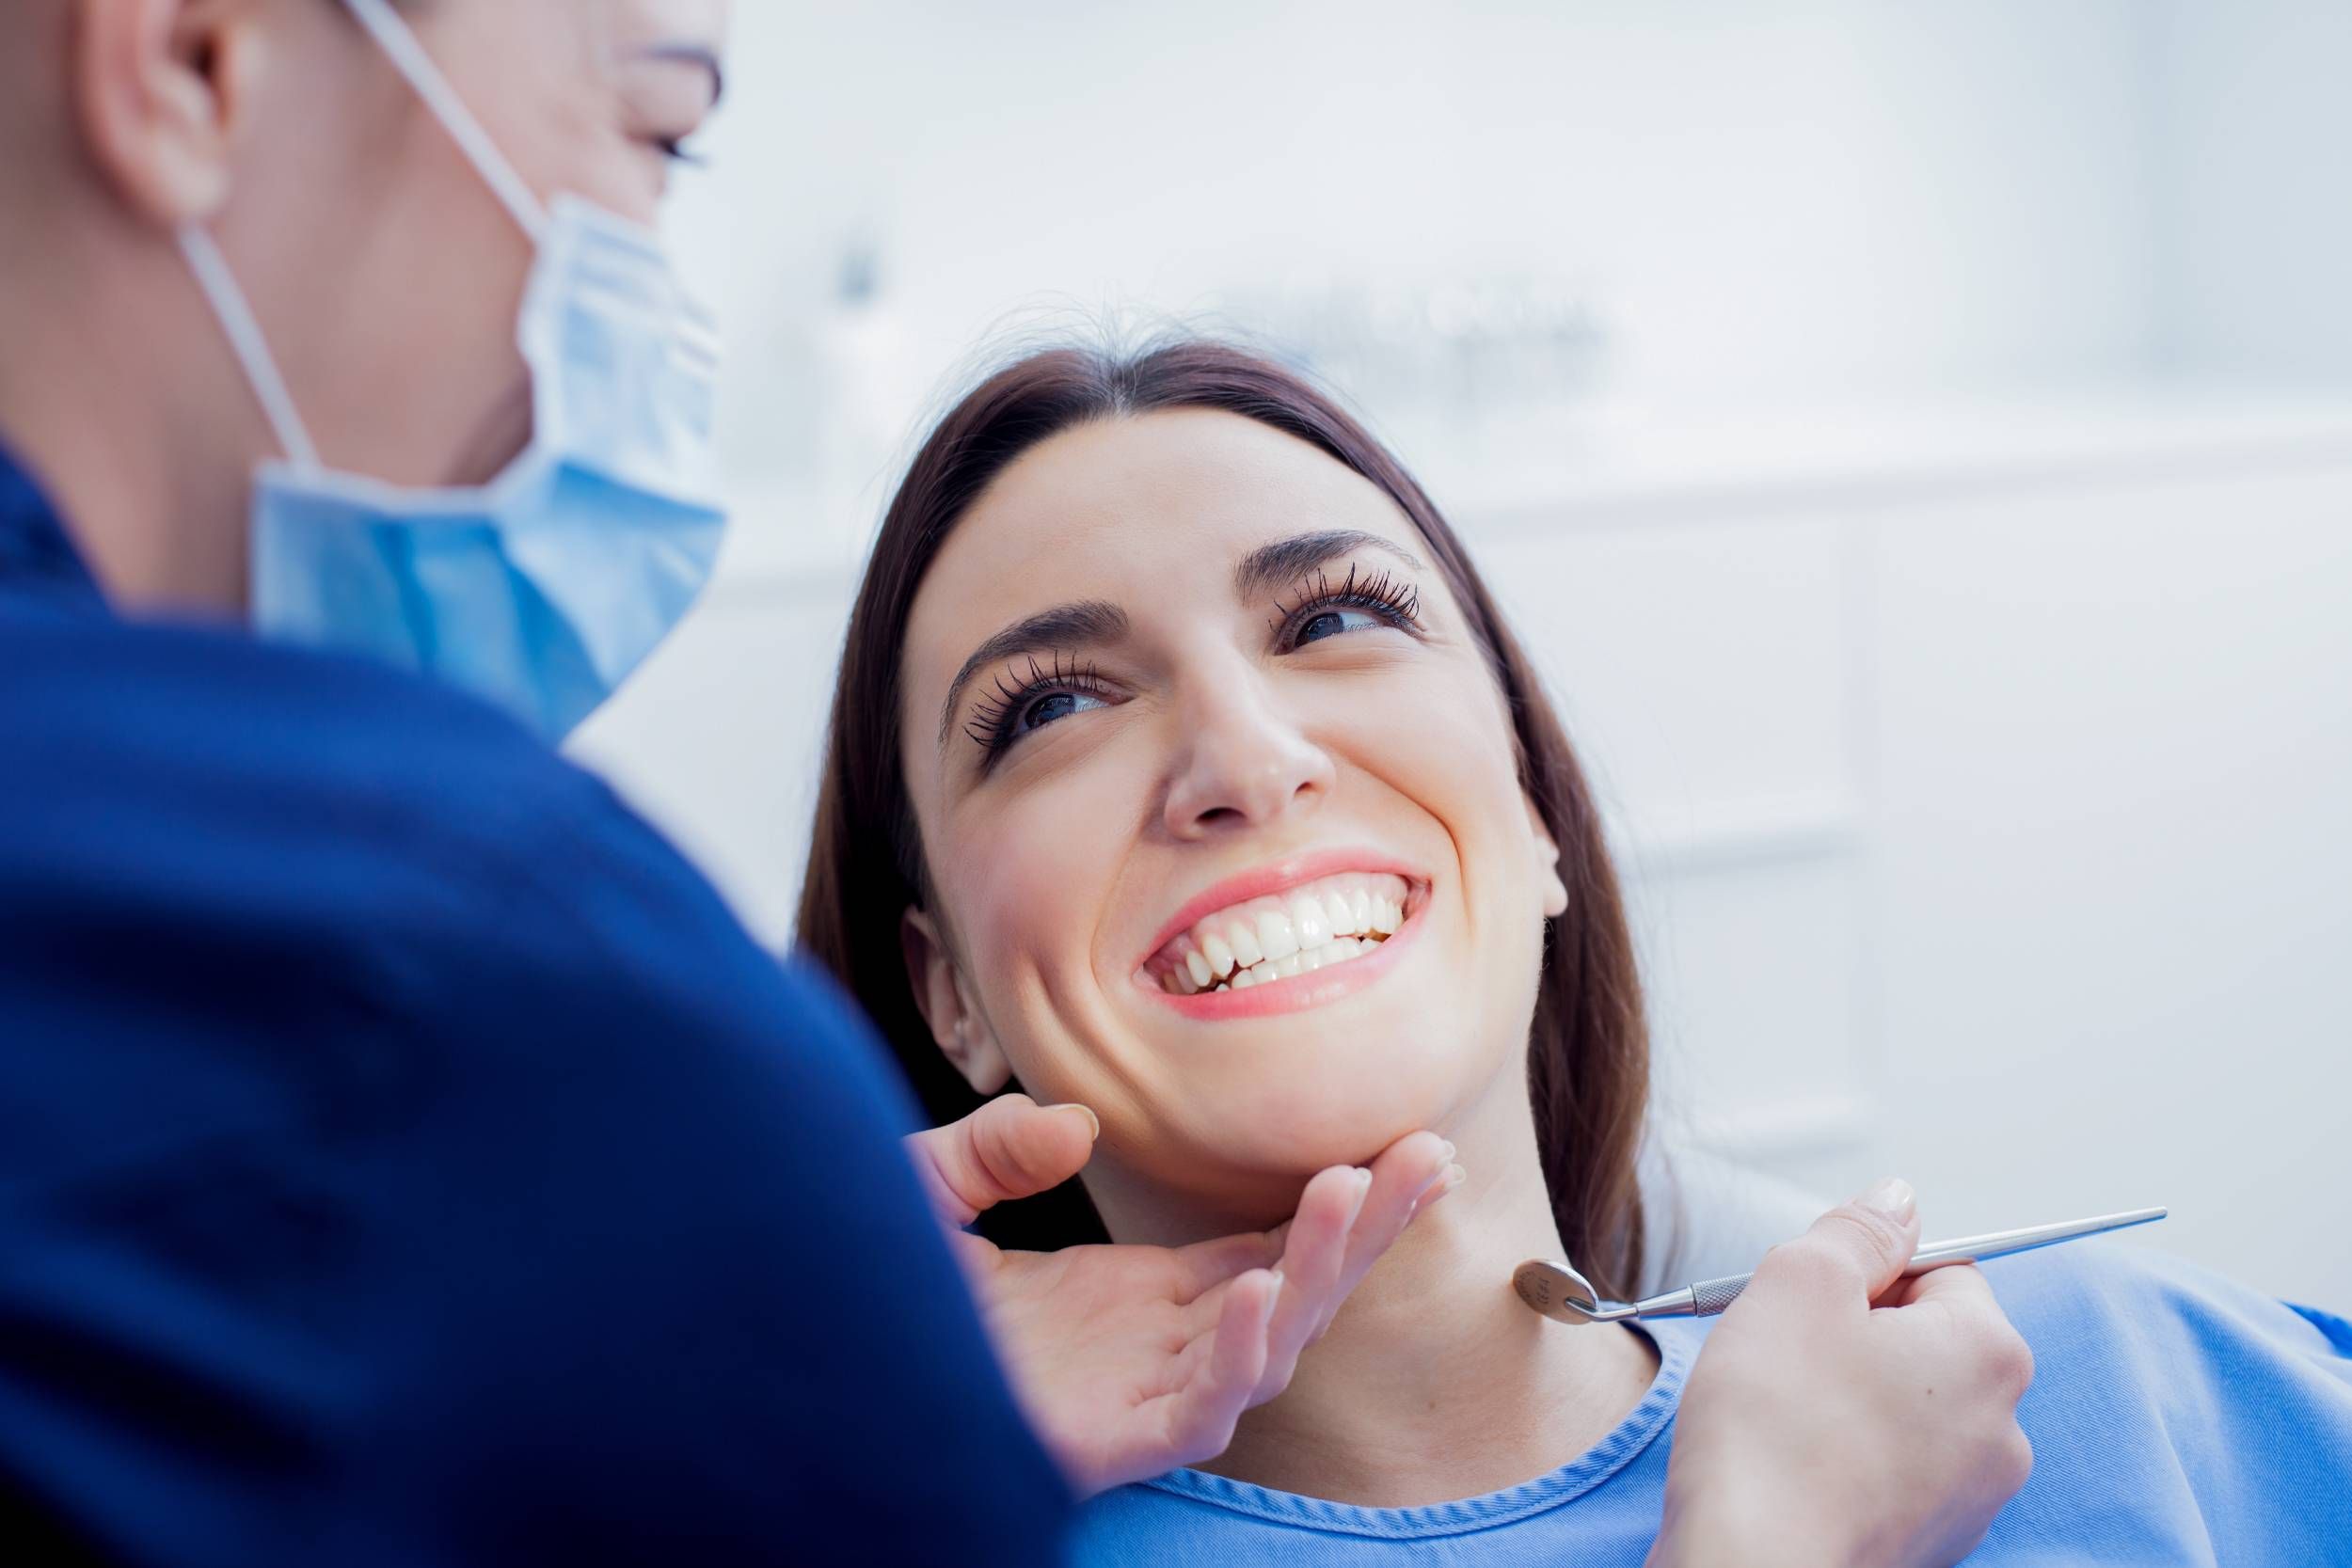 Periodontal Surgery: Preparation, Procedure and Recovery